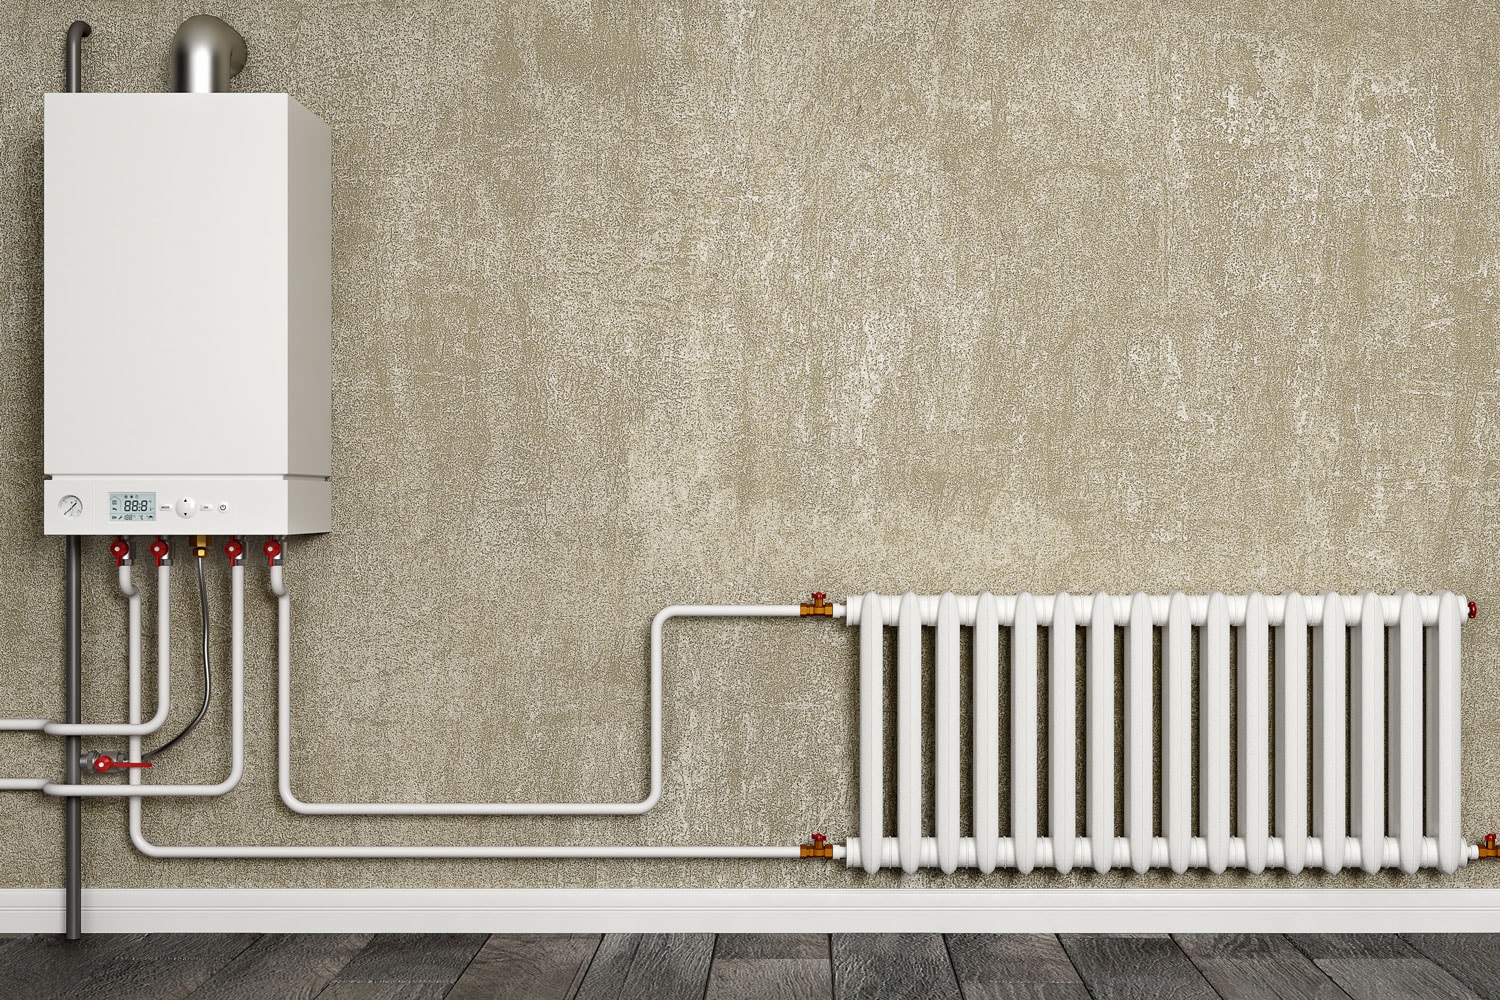 Boiler, water pipes and radiator in front of concrete wall